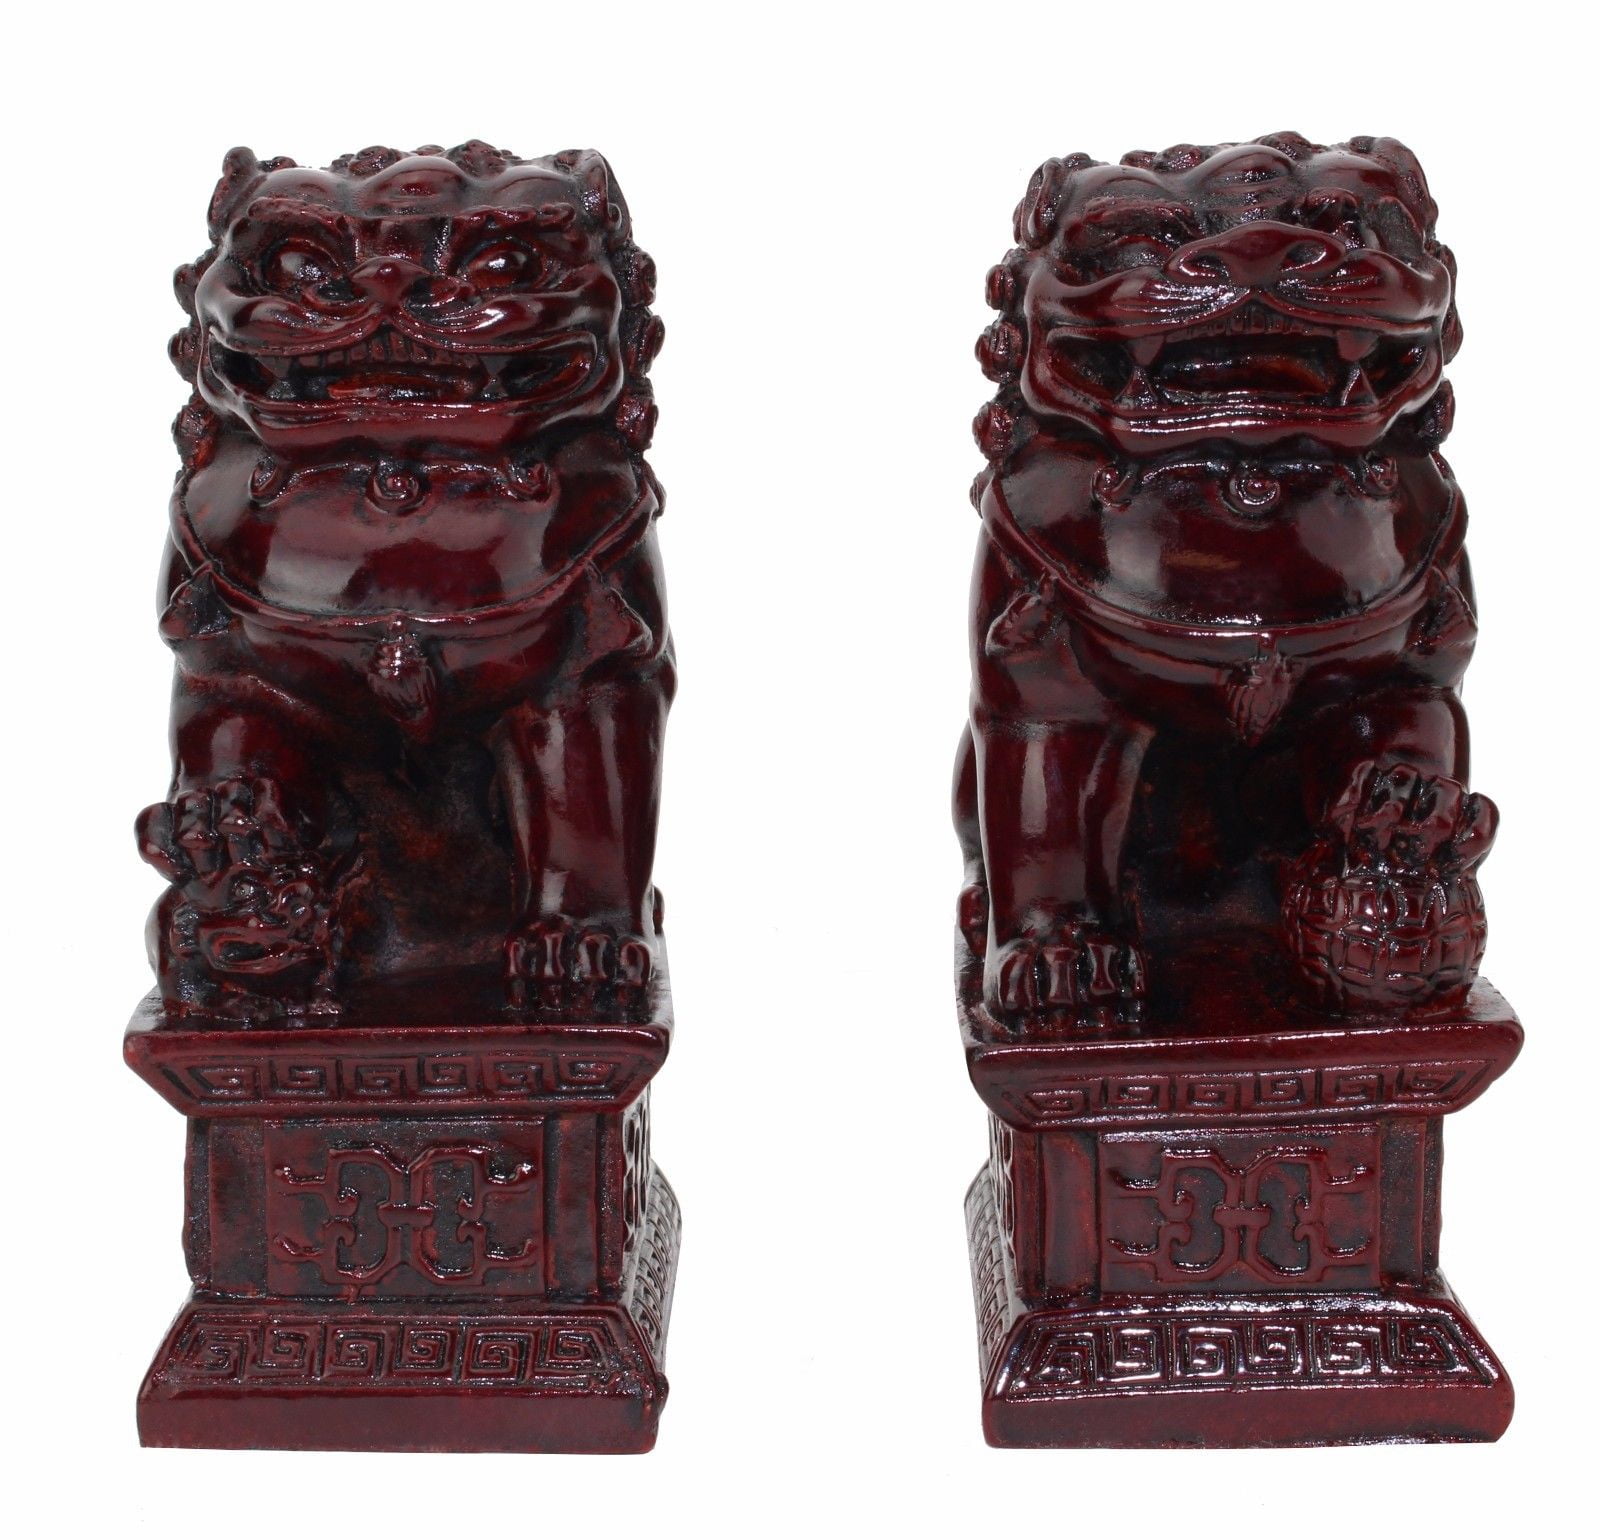 2 NEW PAIR CHINESE ORIENTAL FOO DOGS IMPERIAL LIONS FUNG SHUI STATUE FIGURE 4" 